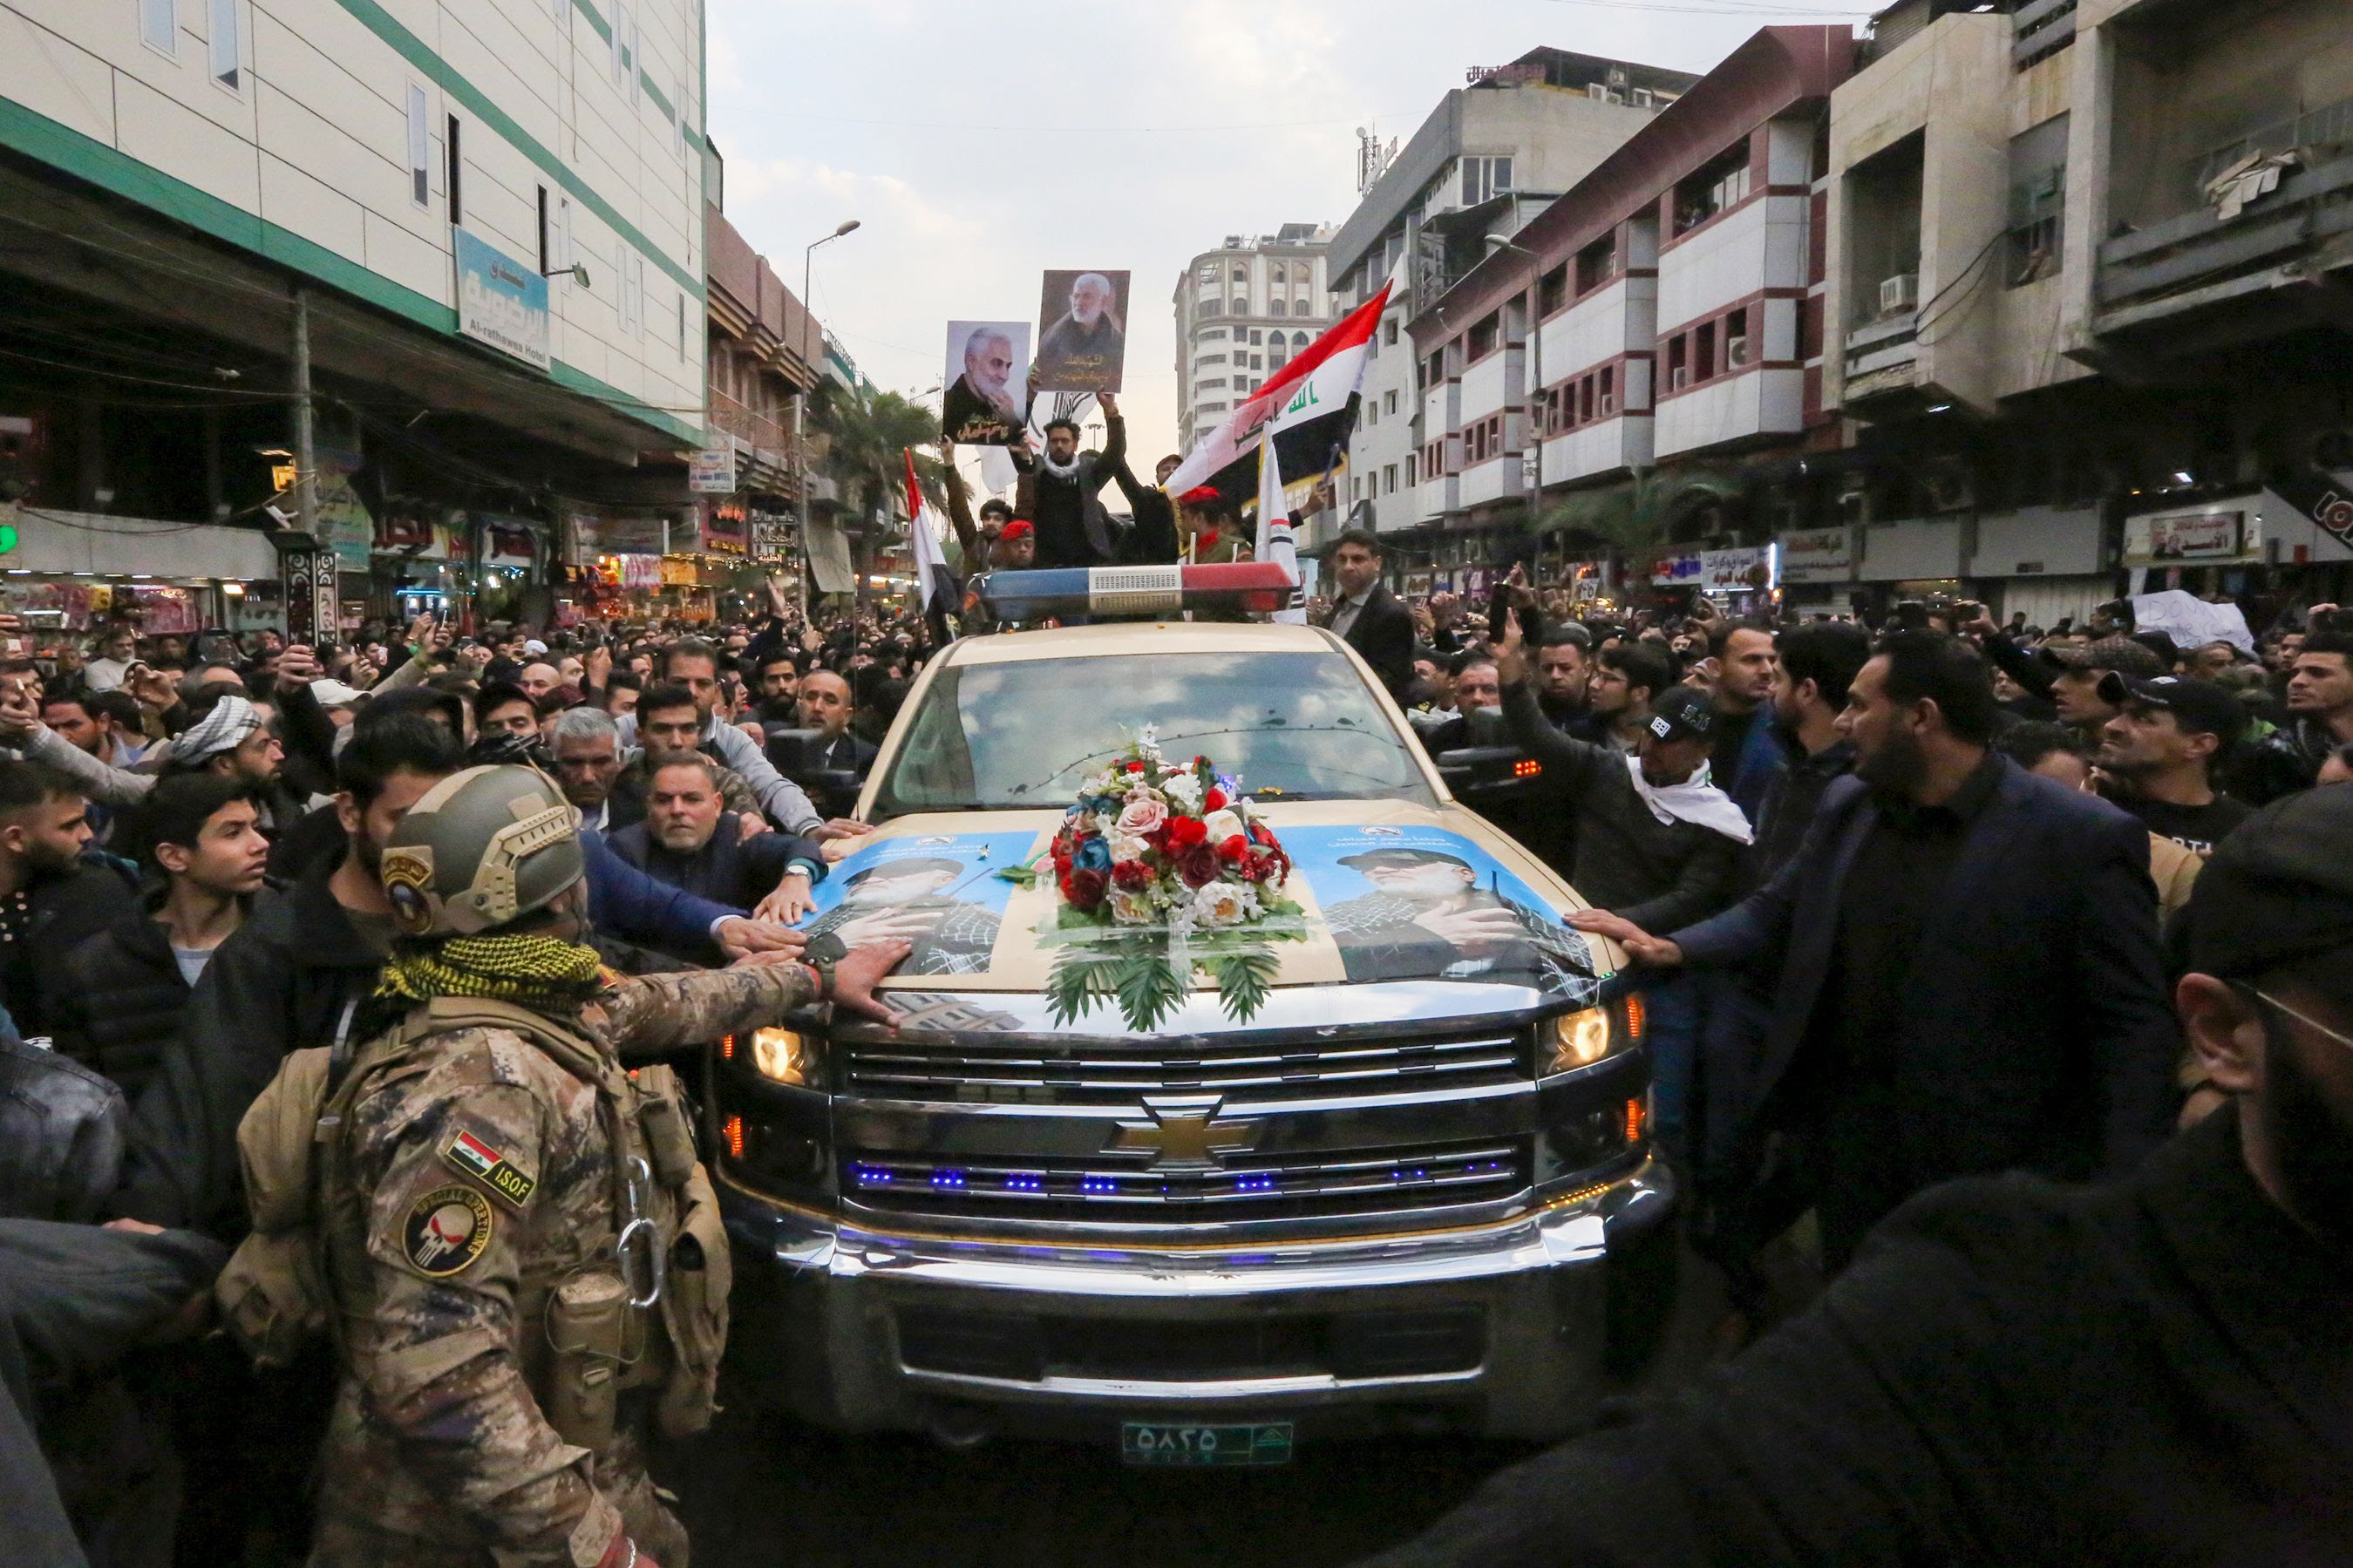  Mourners surround a car carrying the coffin of Iranian military commander Qasem Soleimani